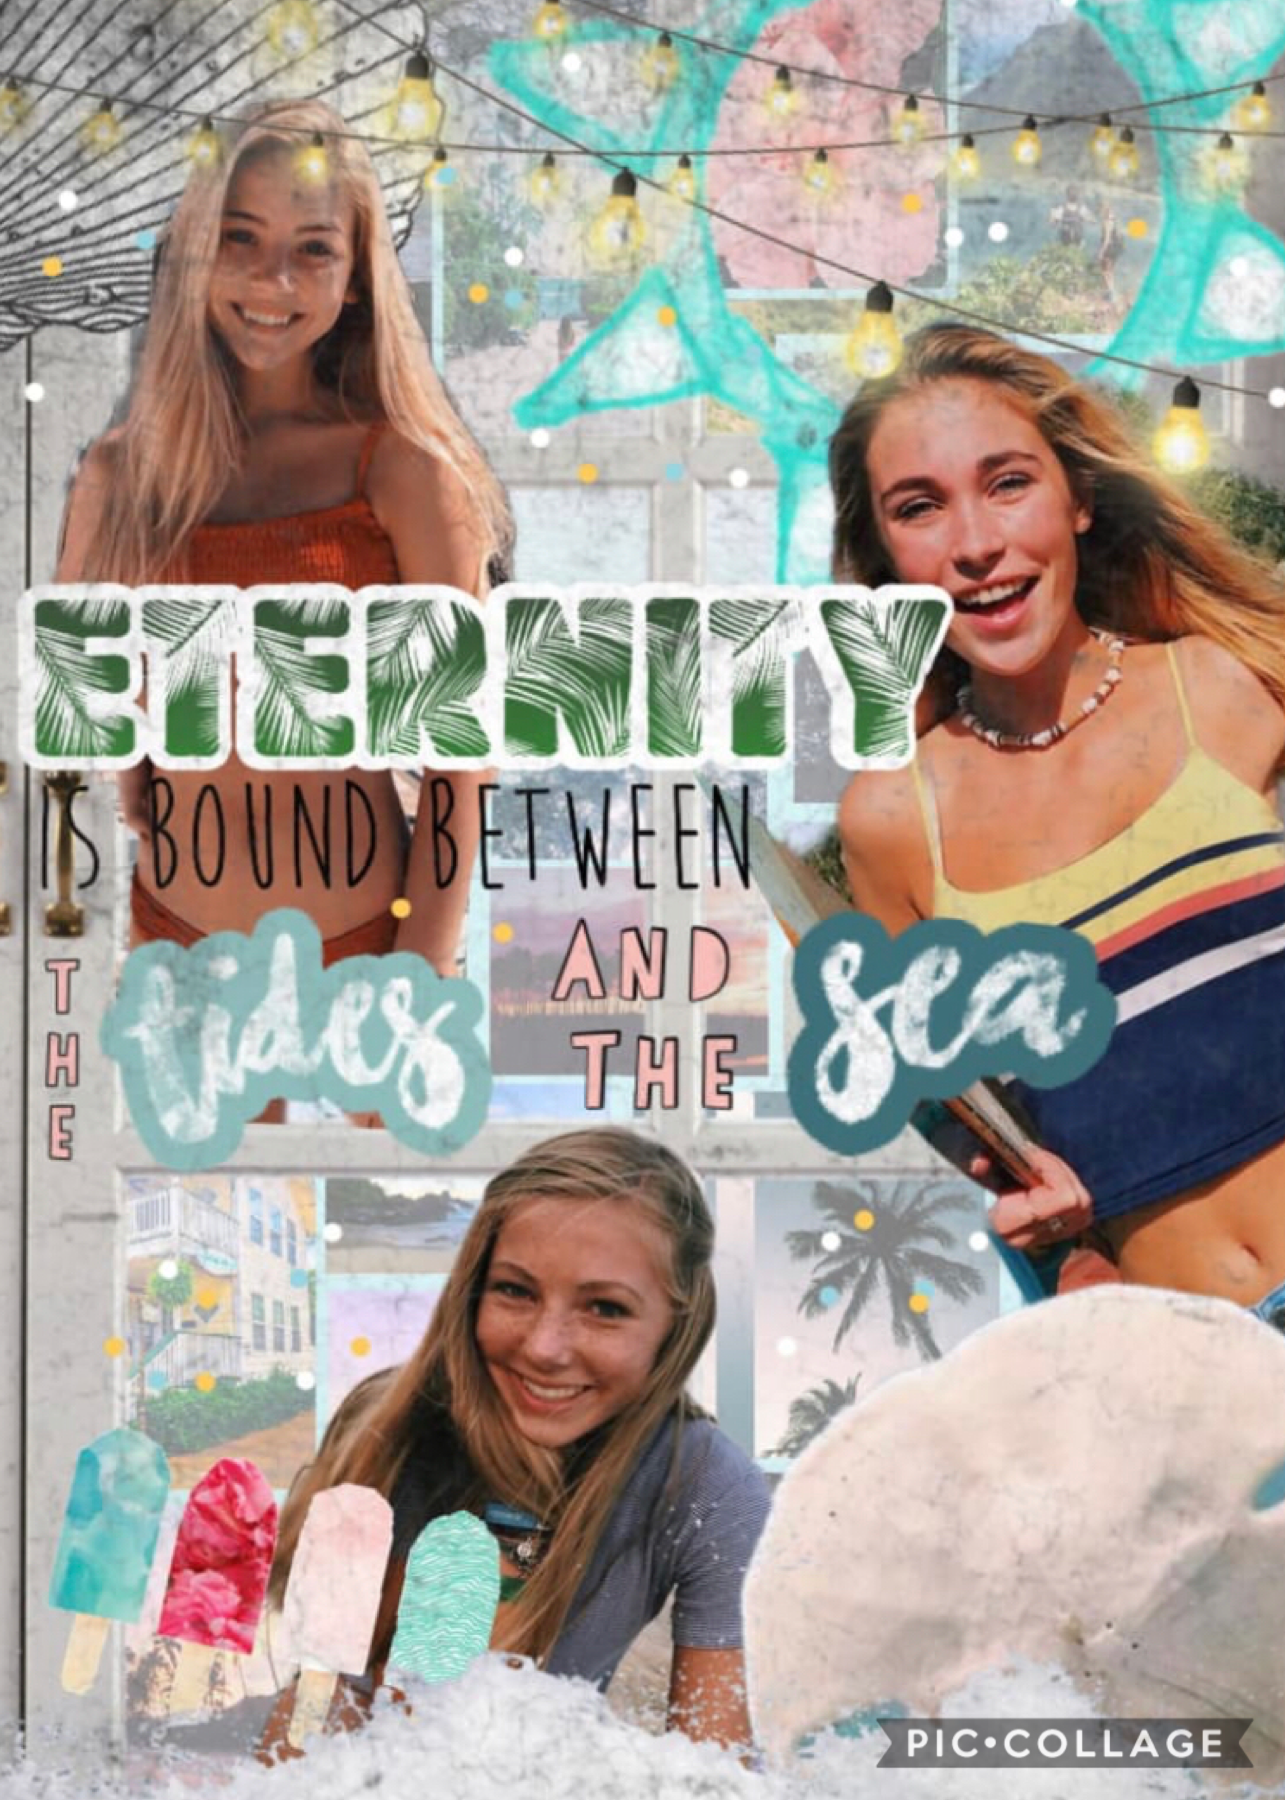 ➪Eternity is bound between the tides and the sea